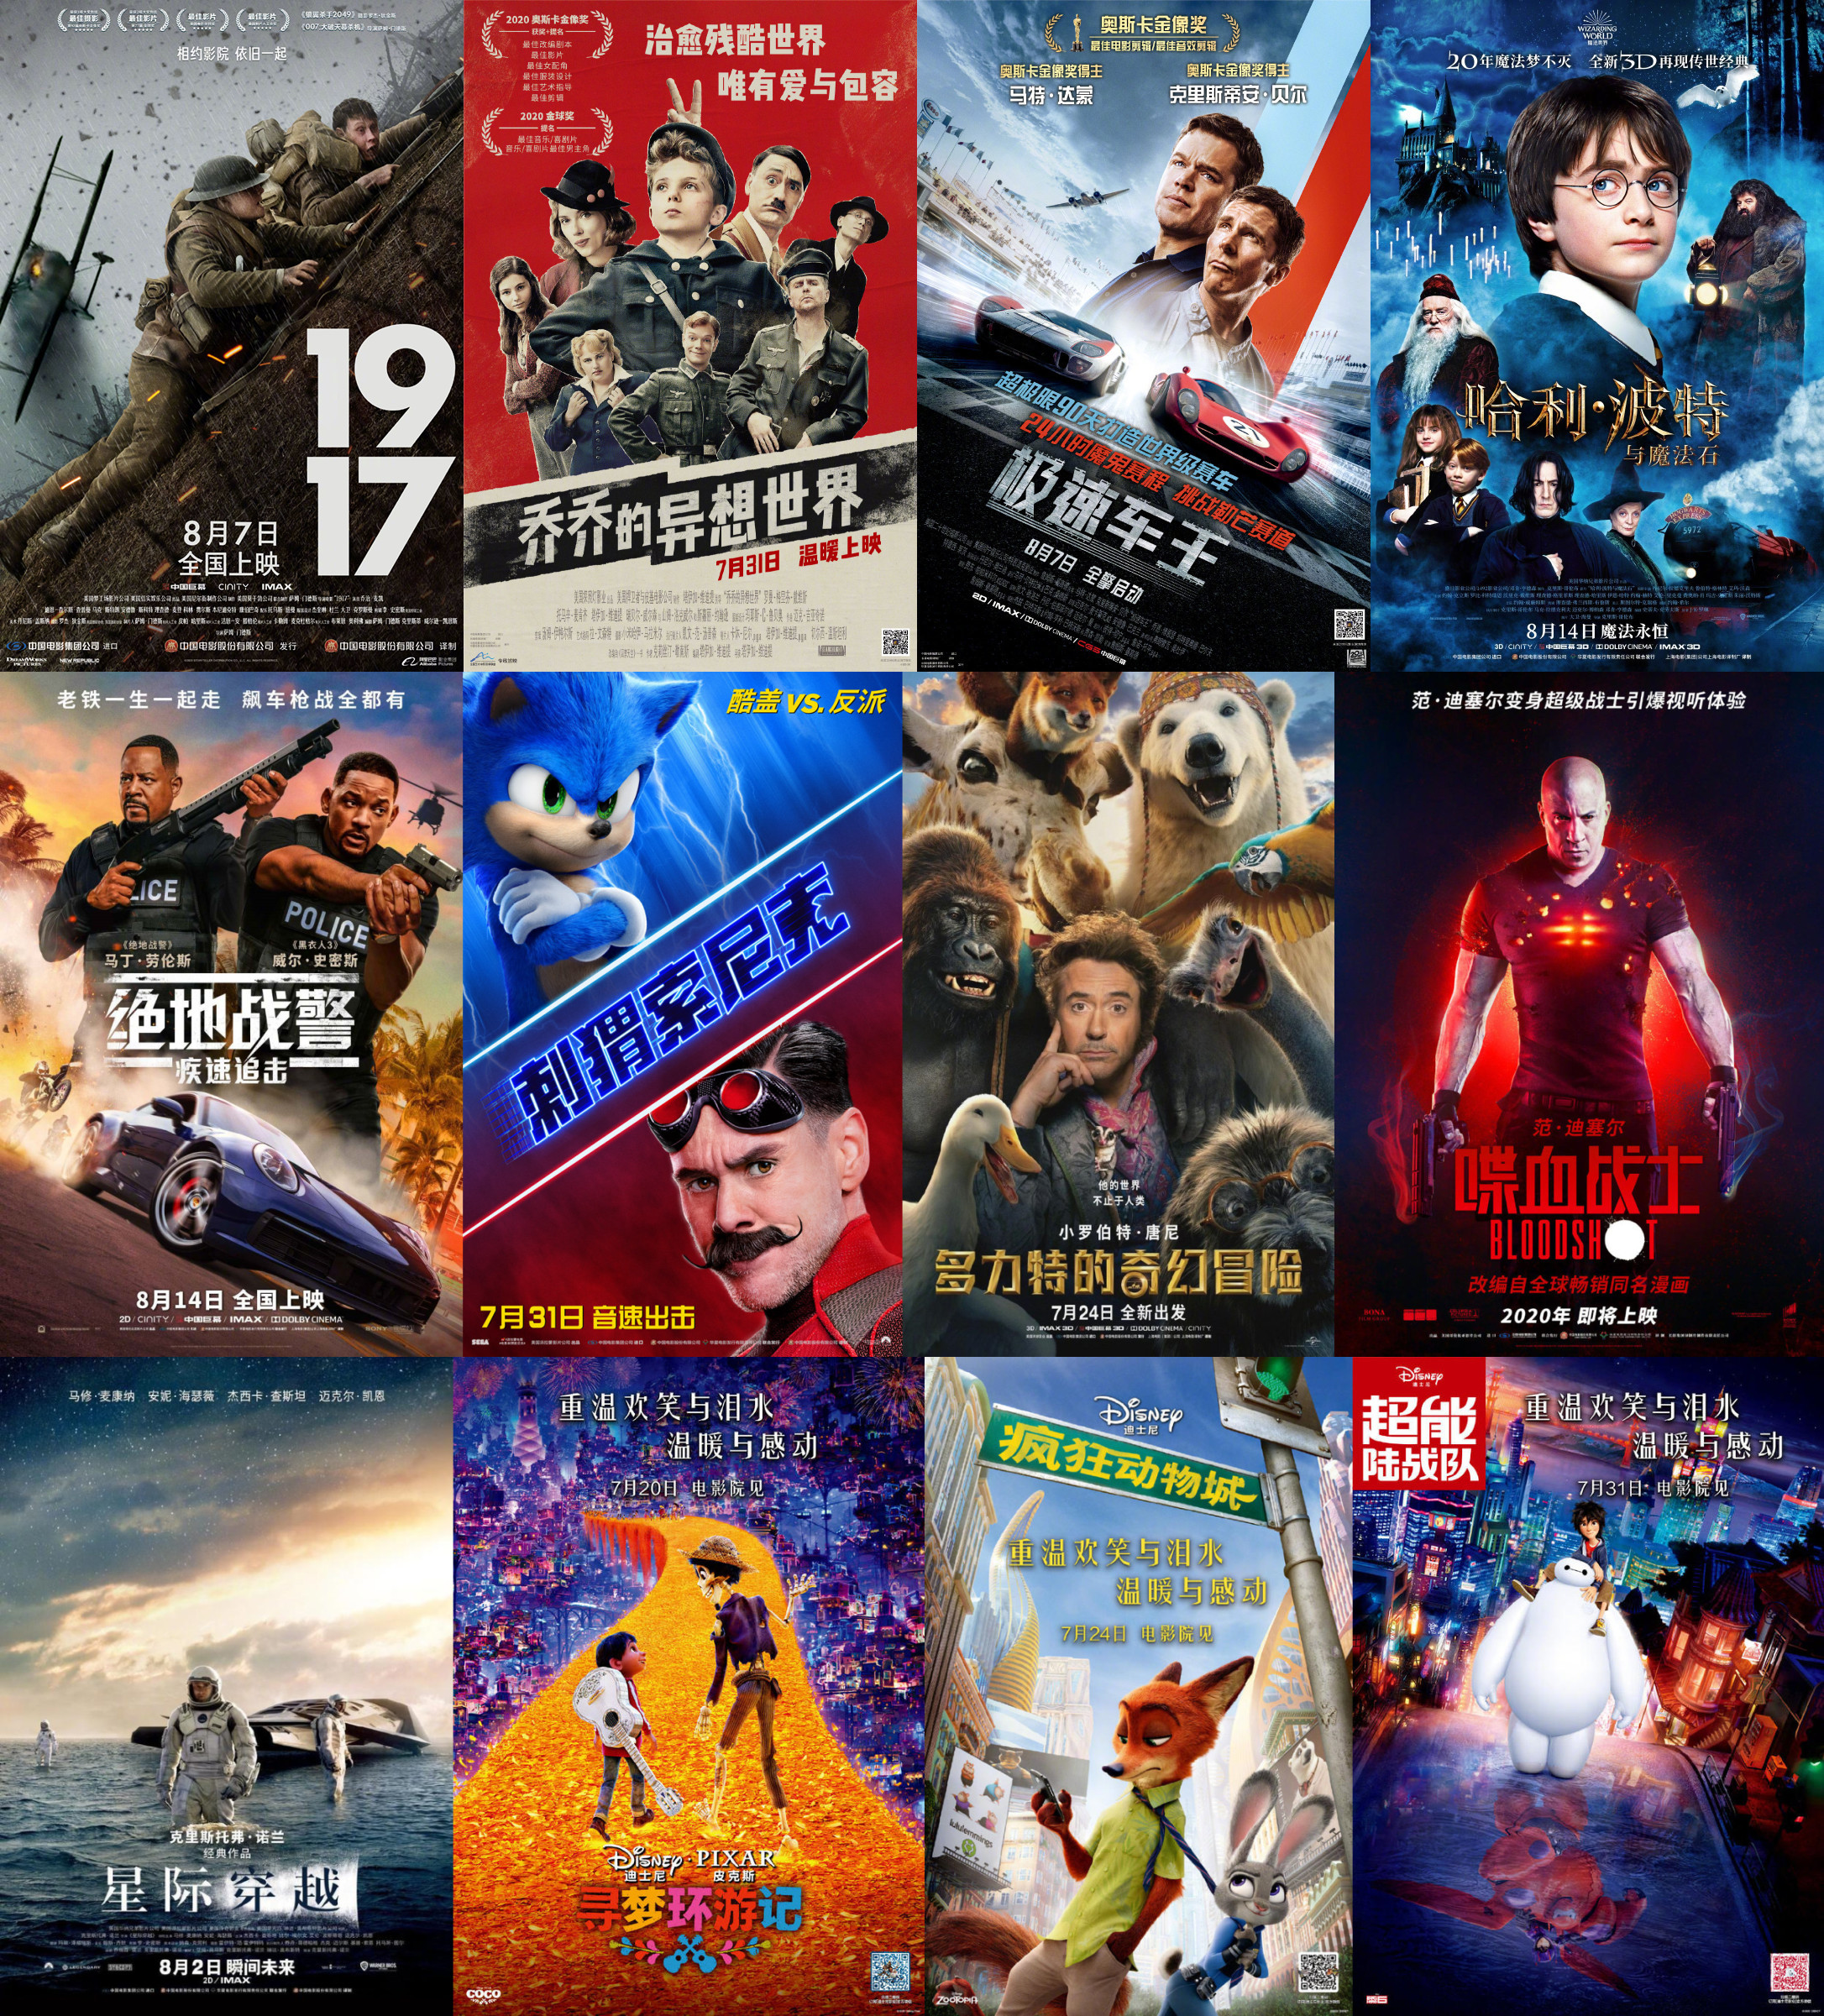 Hollywood blockbusters set China release dates